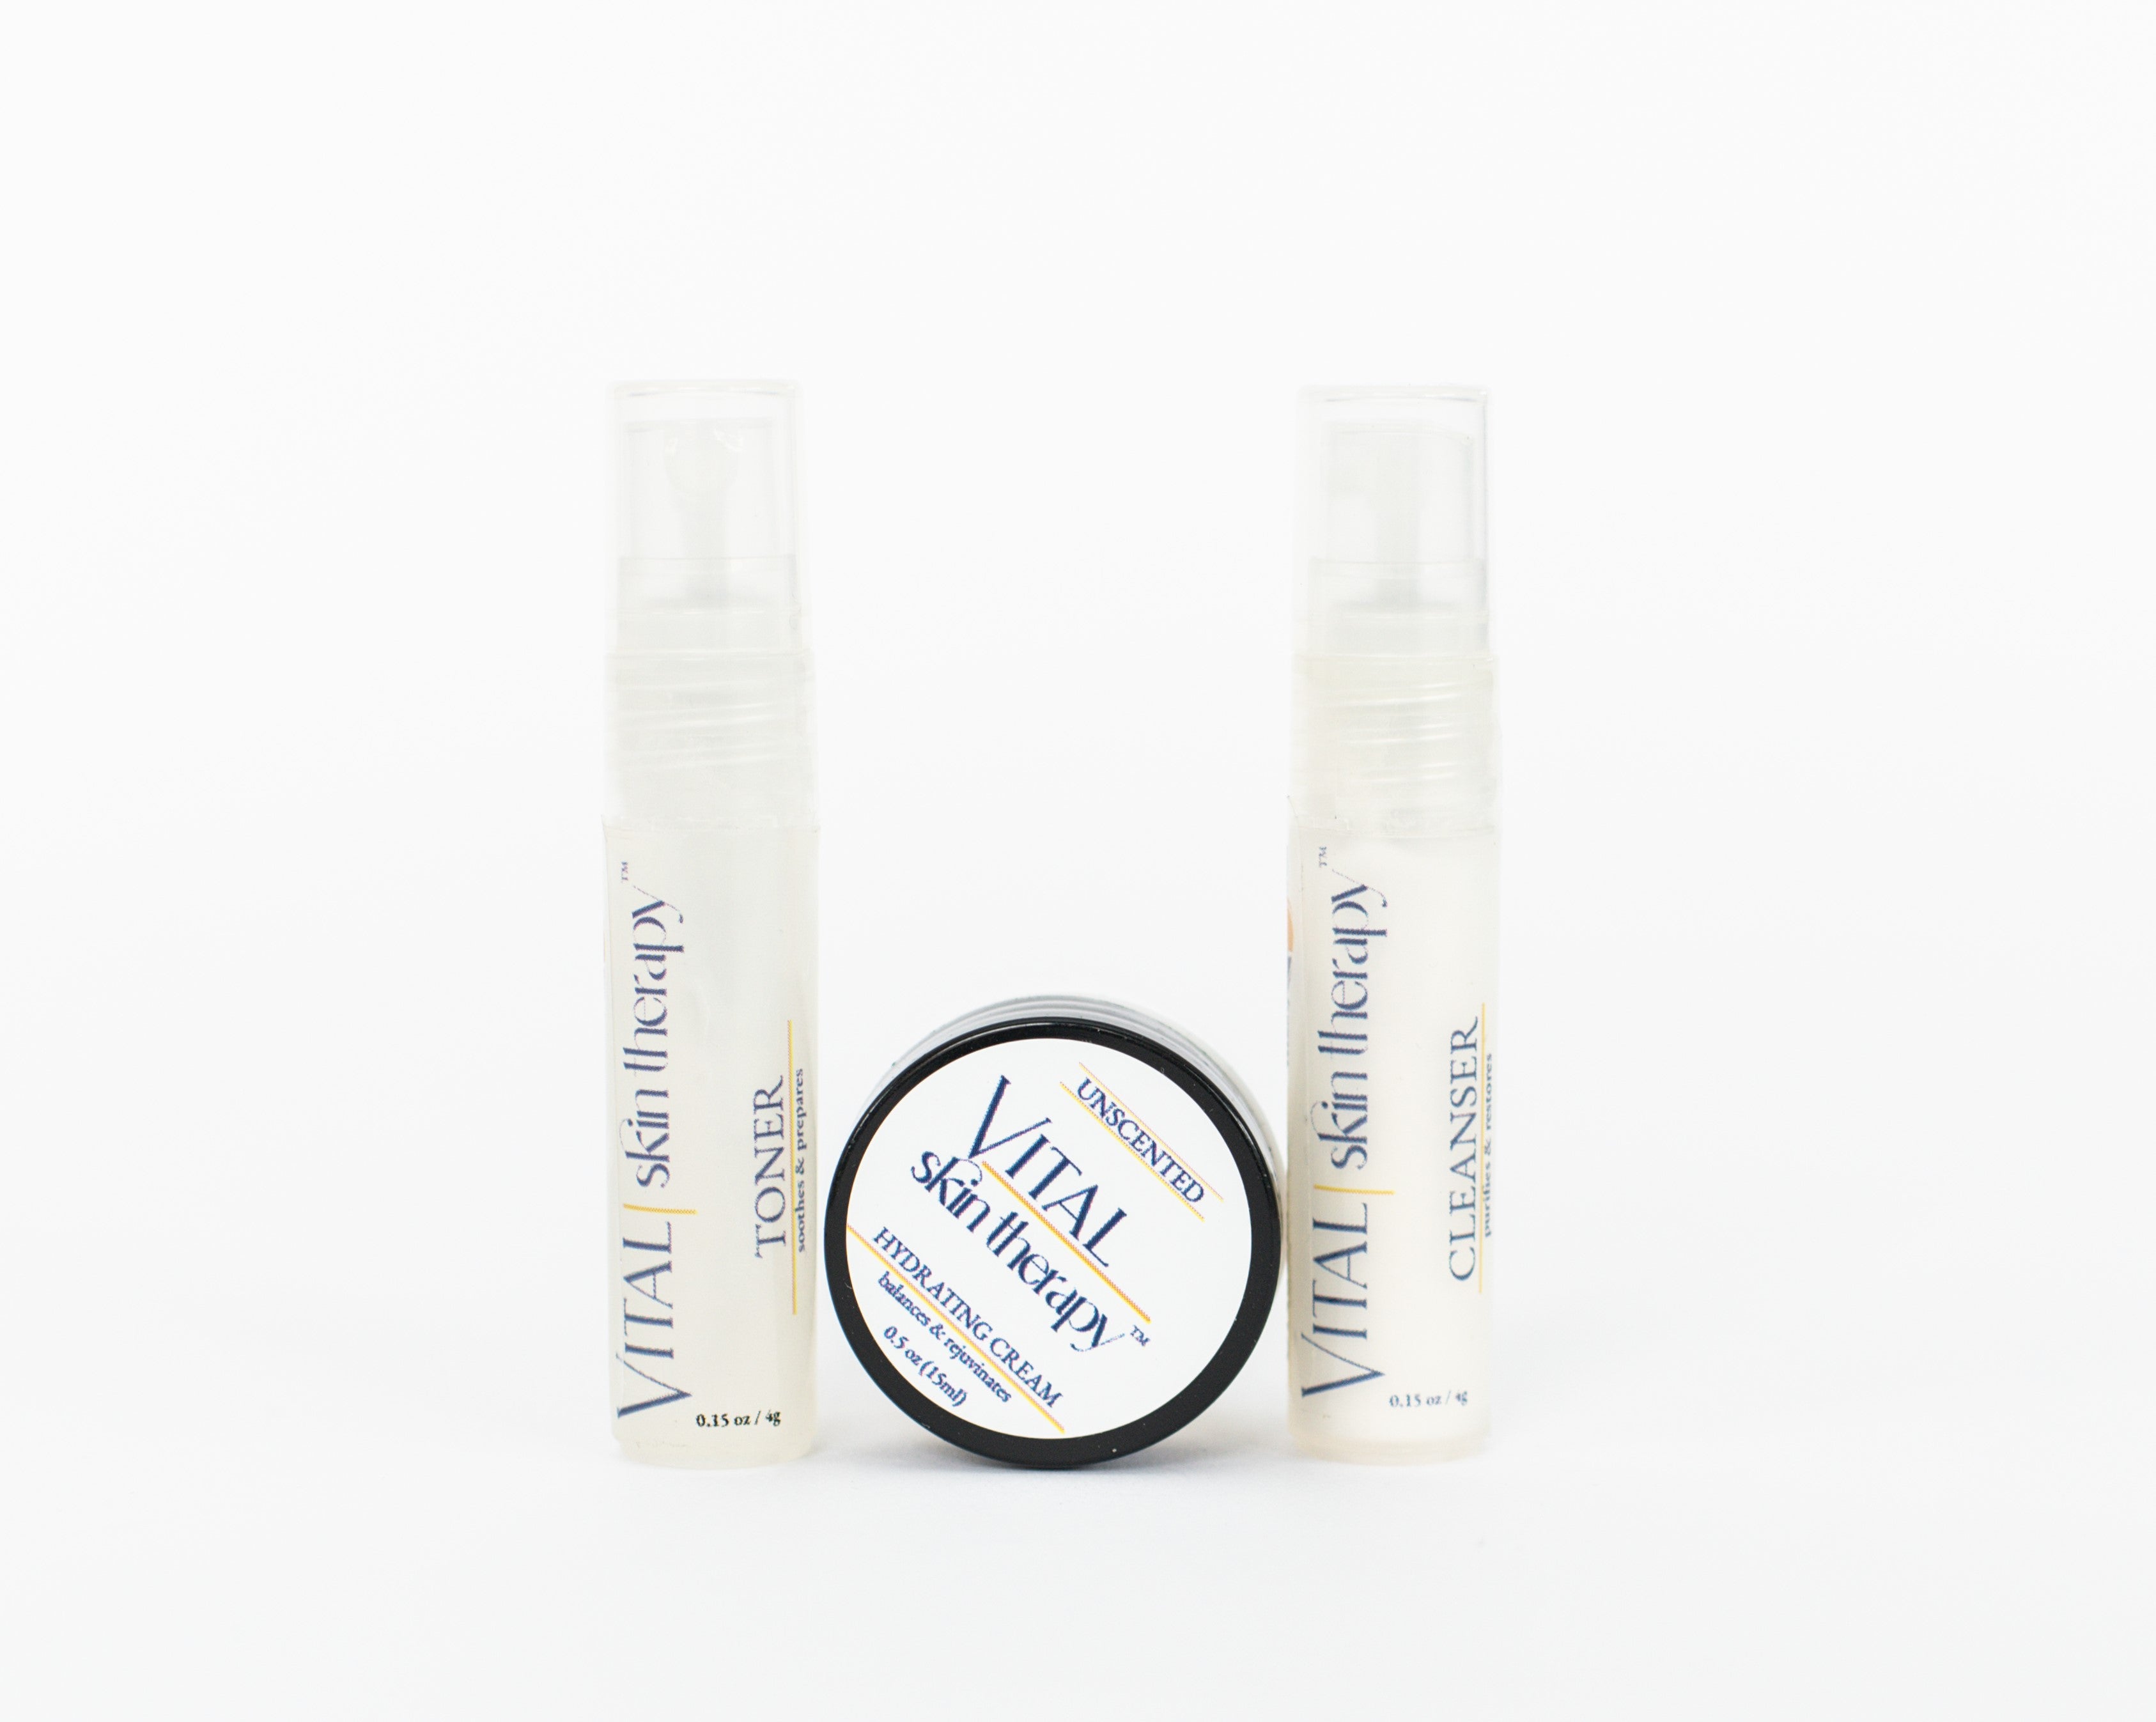 Vital Skin Therapy Essential Minis - perfect to try it out, gift, or travel